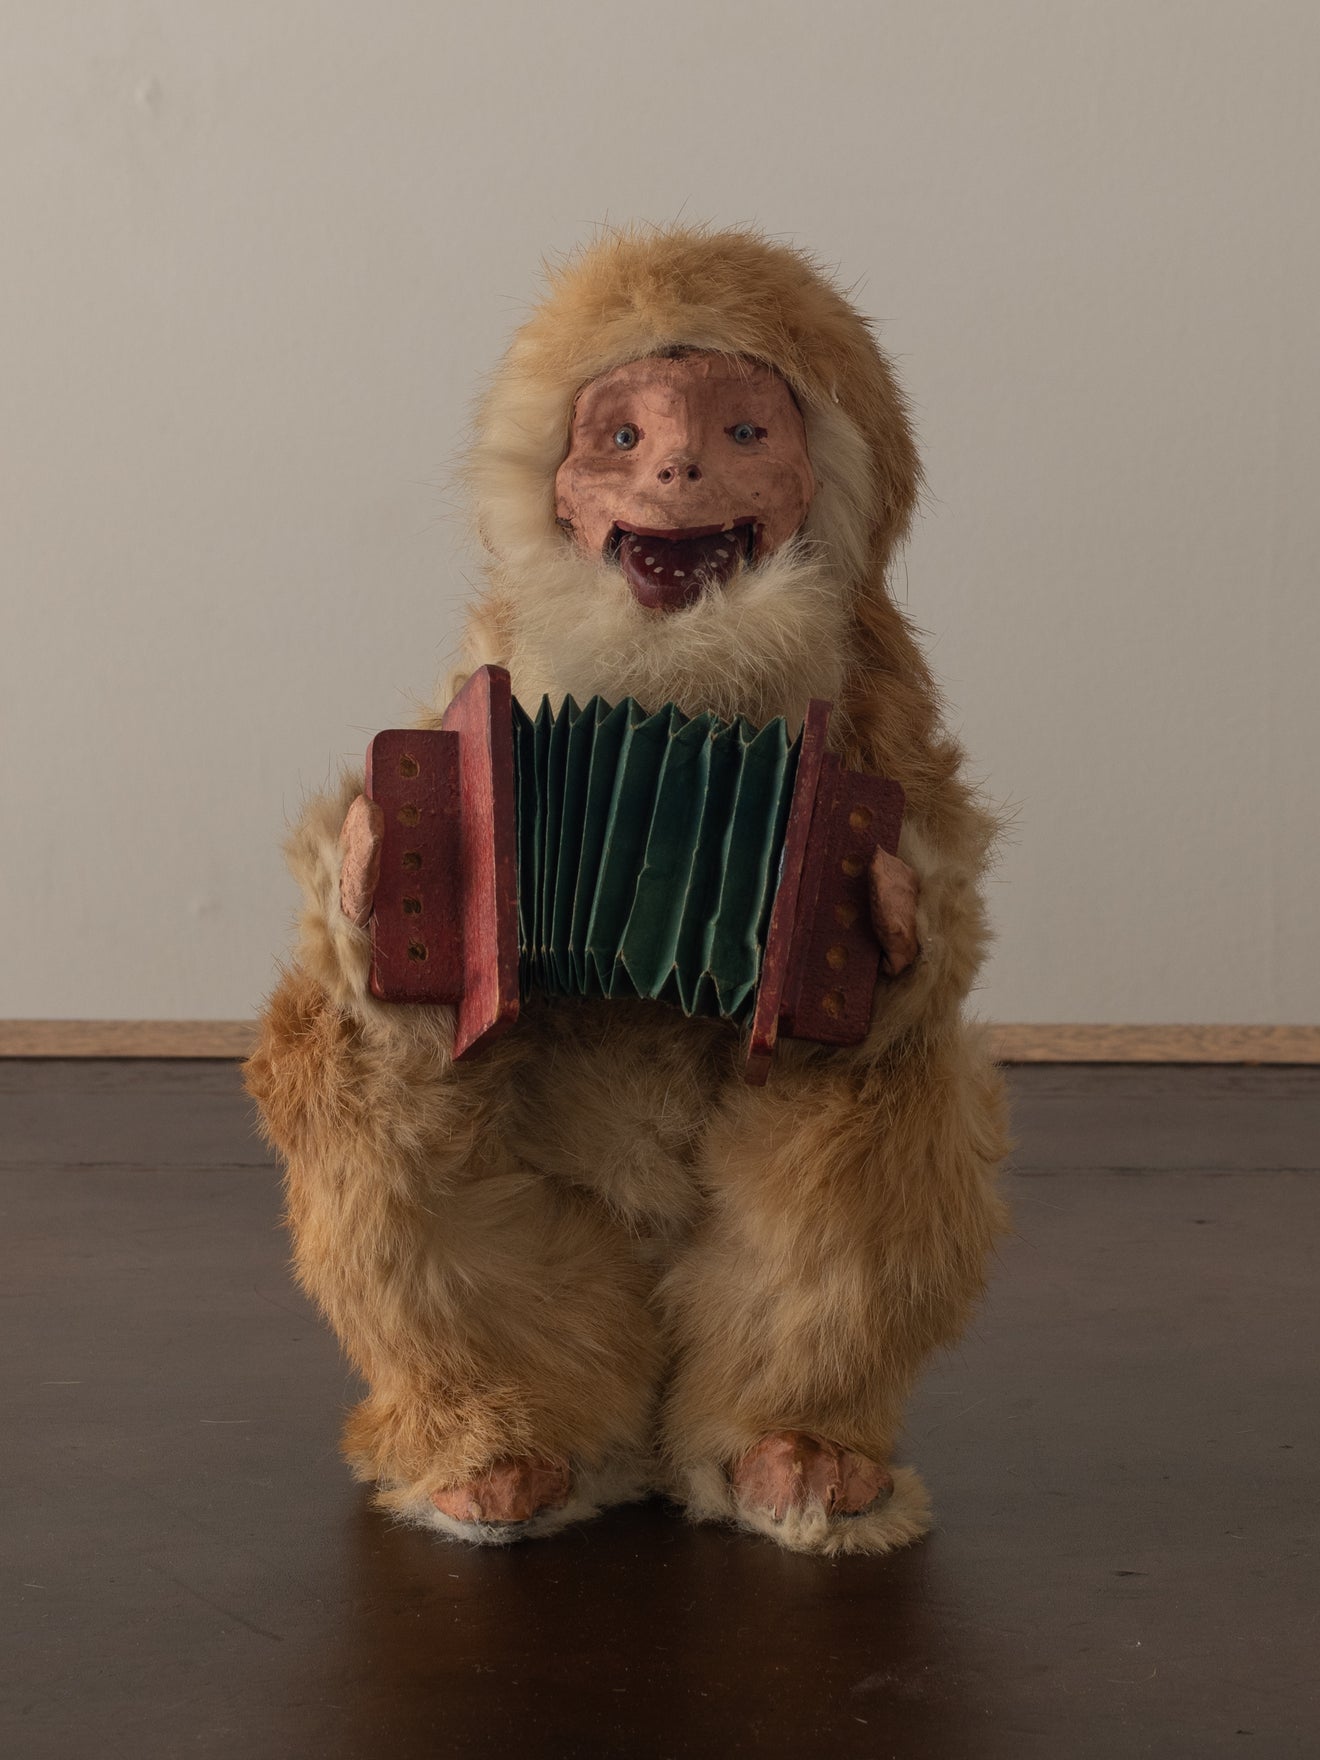 MONKEY AUTOMATON ACCORDION PLAYER BY ROULLET & DECAMPS